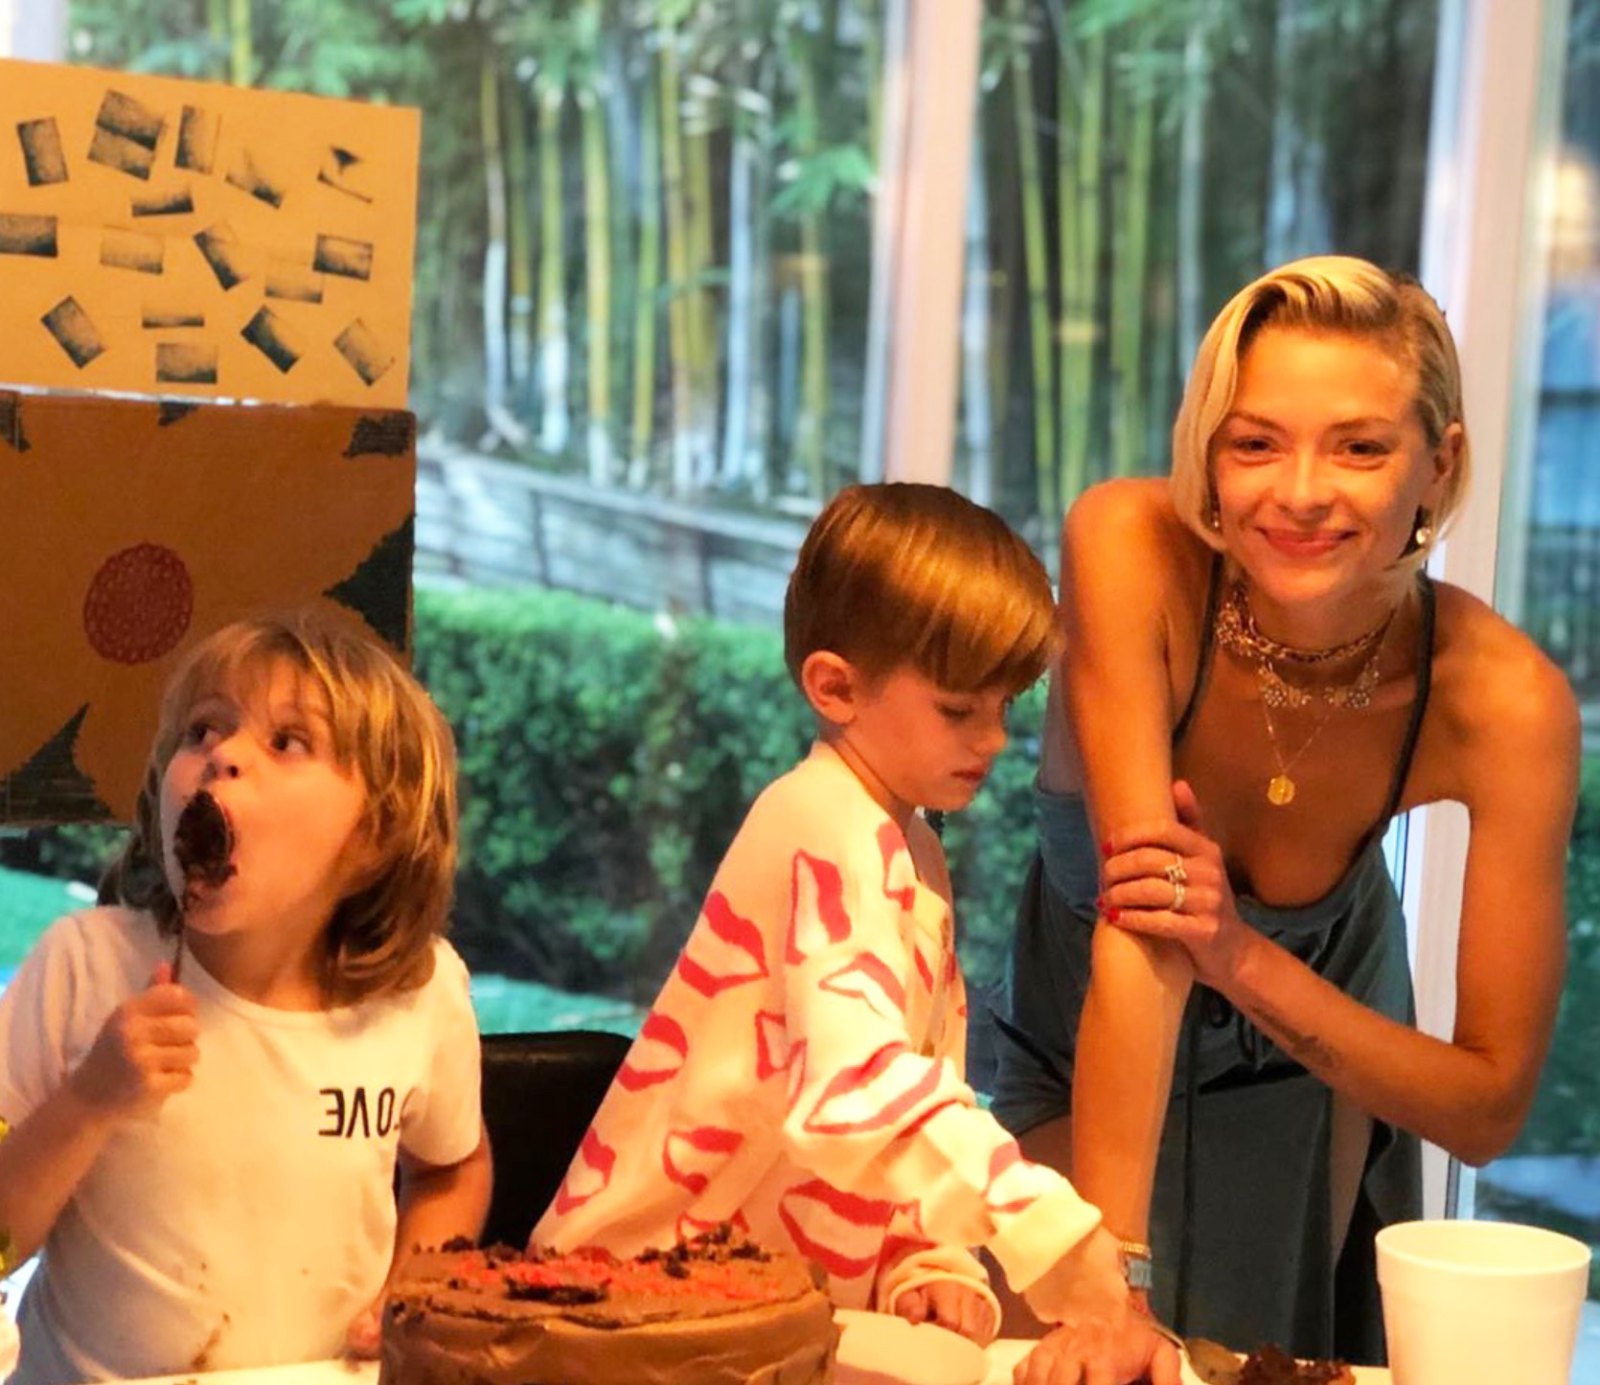 Jaime King Tags Estranged Husband Kyle Newman in Sons Birthday Post